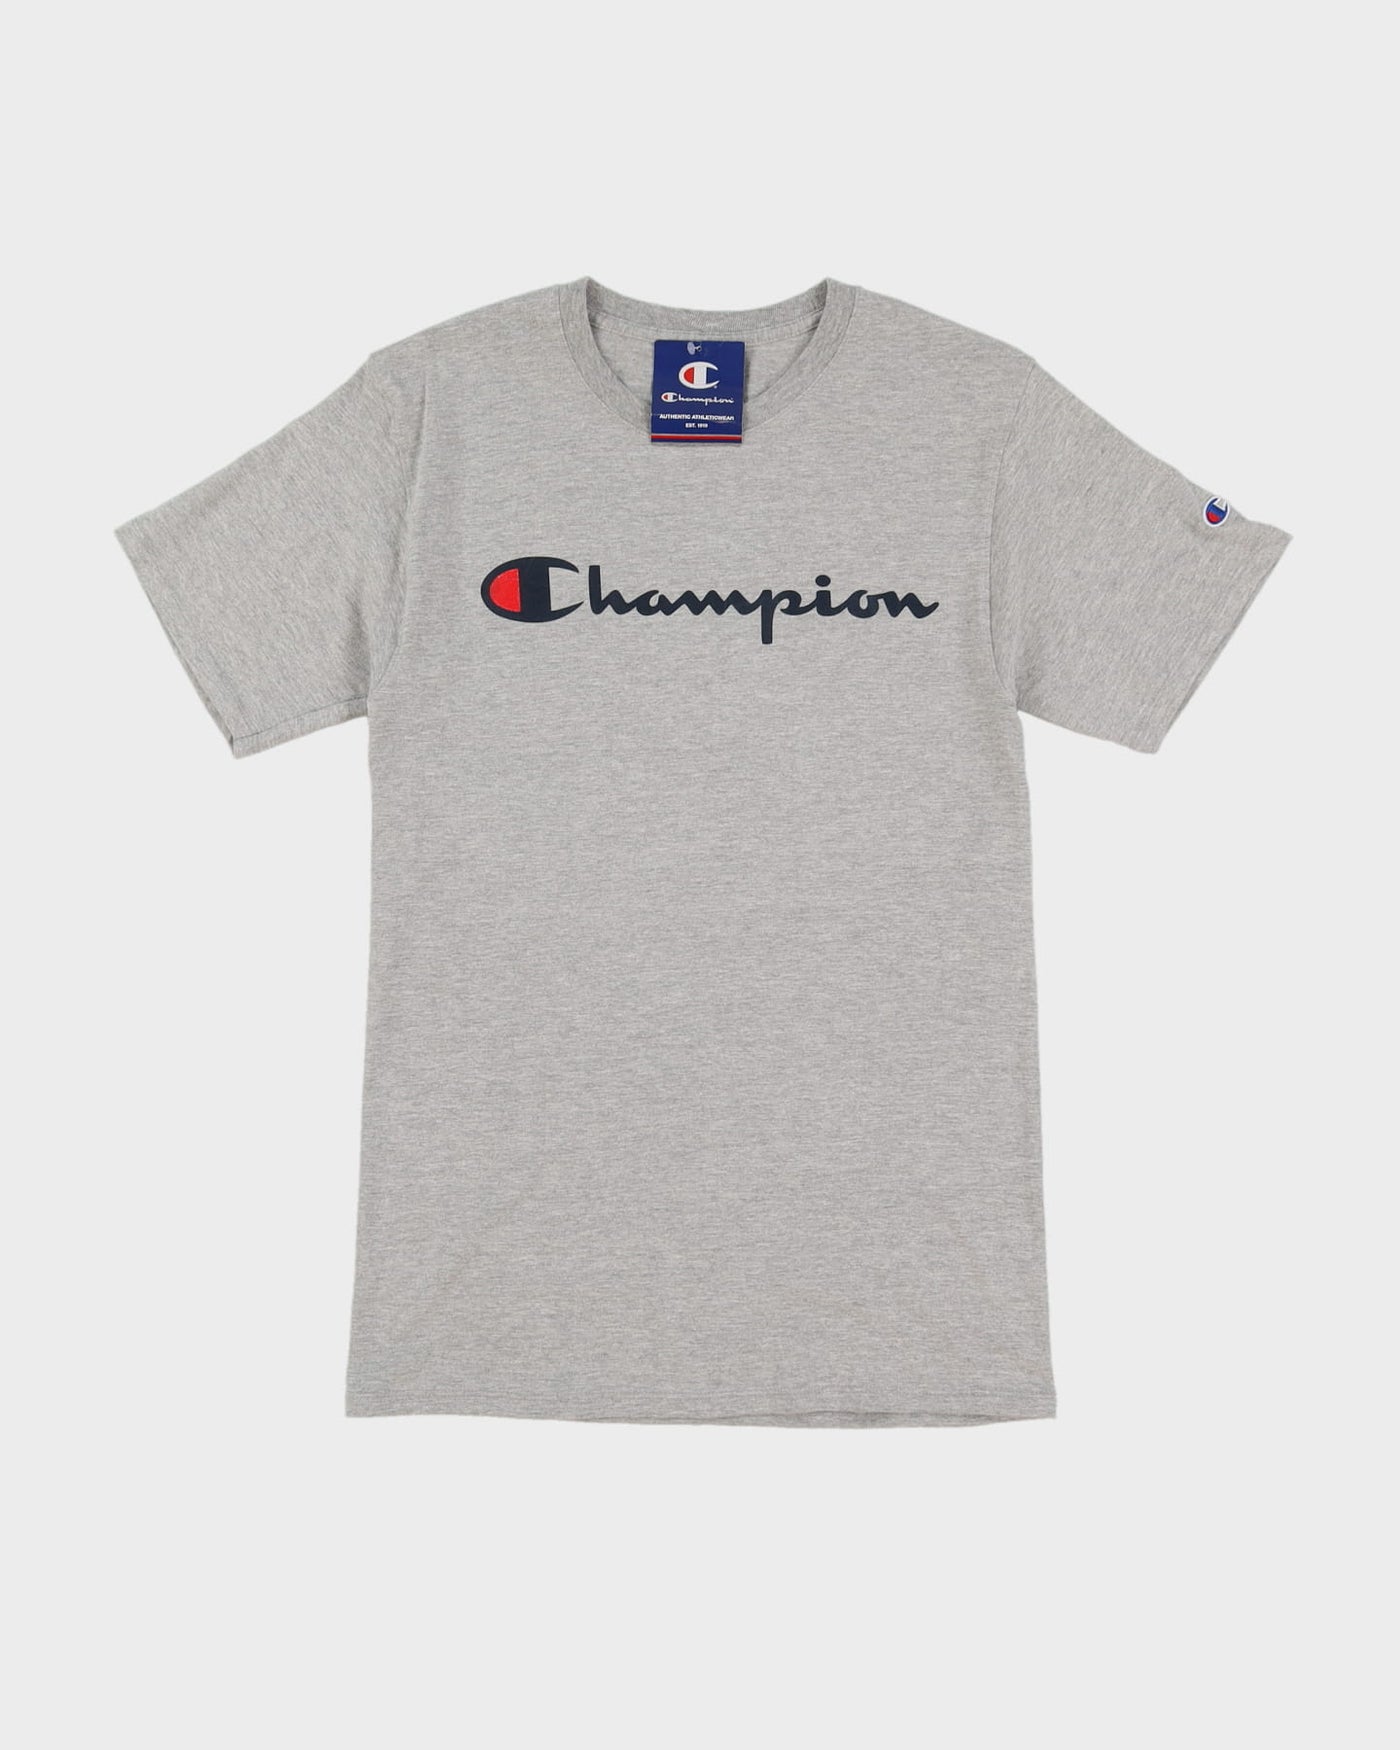 New With Tags Champion Grey T-Shirt - S